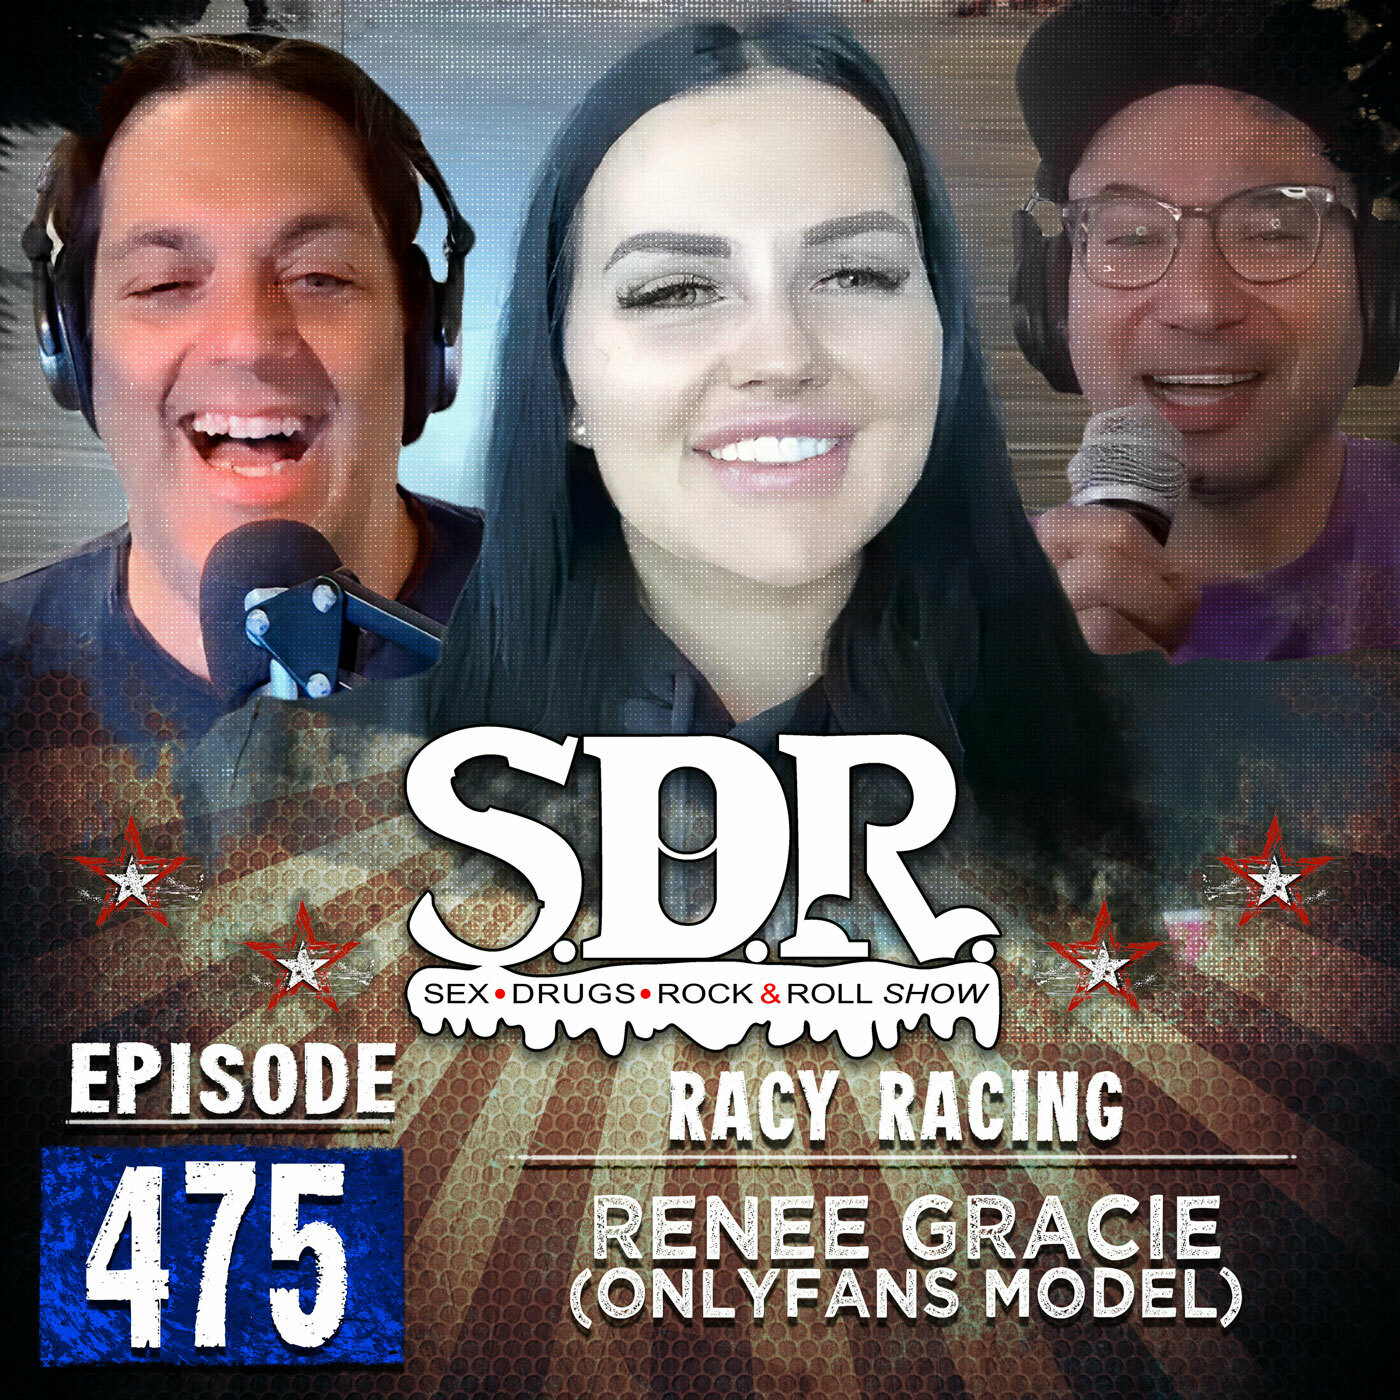 Renee Gracie Onlyfans Model Racy Racing By The Sdr Show Sex Drugs